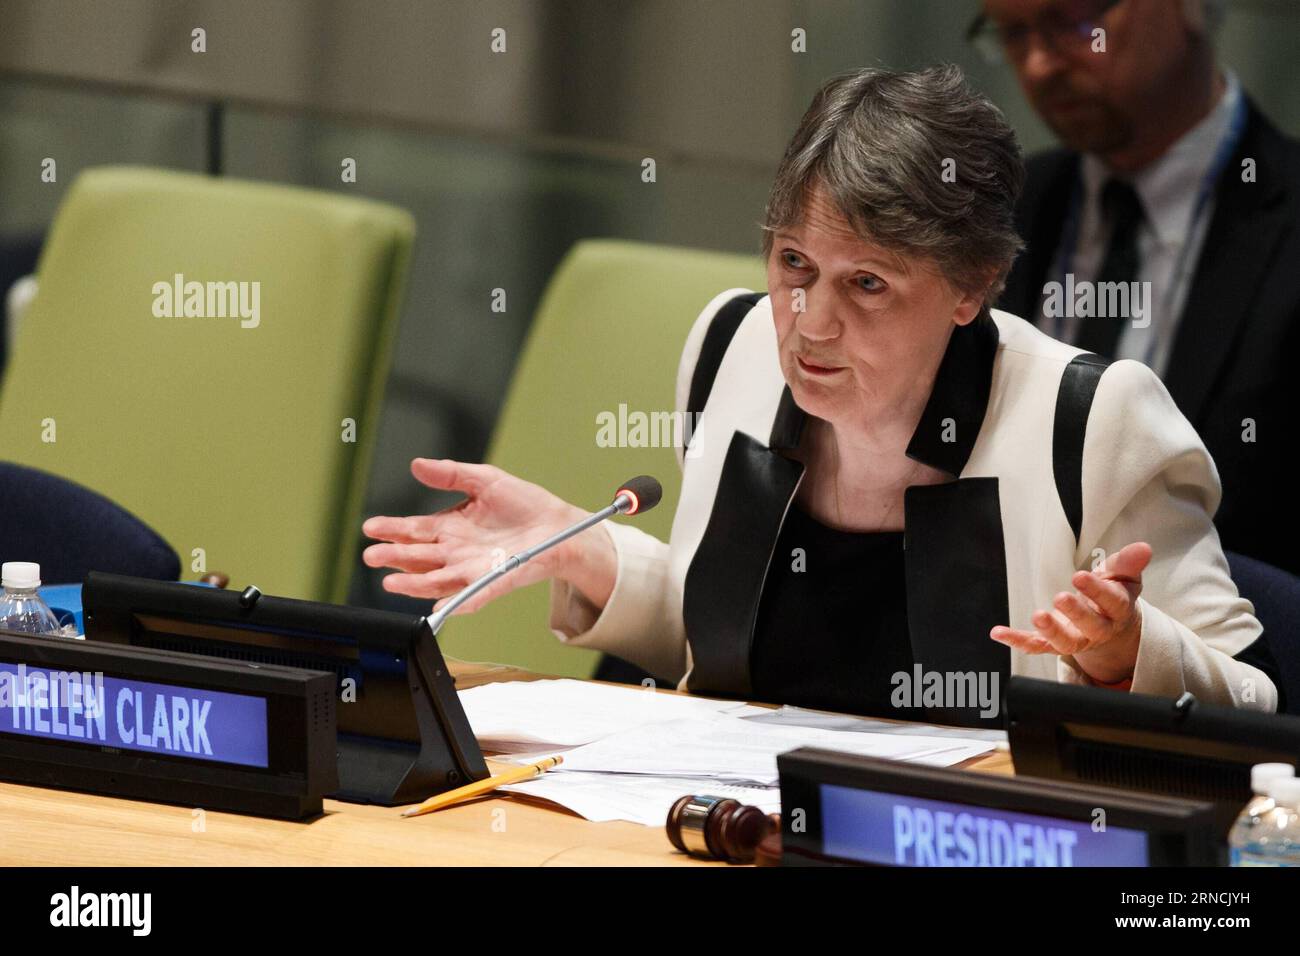 160414 -- NEW YORK, April 14, 2016 -- Helen Clark, former Prime Minister of New Zealand and Administrator of the United Nations Development Programme UNDP, candidate for the position of the next secretary-general, presents herself to the member states at the United Nations headquarters in New York, April 14, 2016. The UN General Assembly on Tuesday kicked off a three-day informal dialogue with candidates for the position of the next secretary-general.  UN-NEW YORK-GENERAL ASSEMBLY-SECRETARY-GENERAL-CANDIDATE-HELEN CLARK LixMuzi PUBLICATIONxNOTxINxCHN Stock Photo